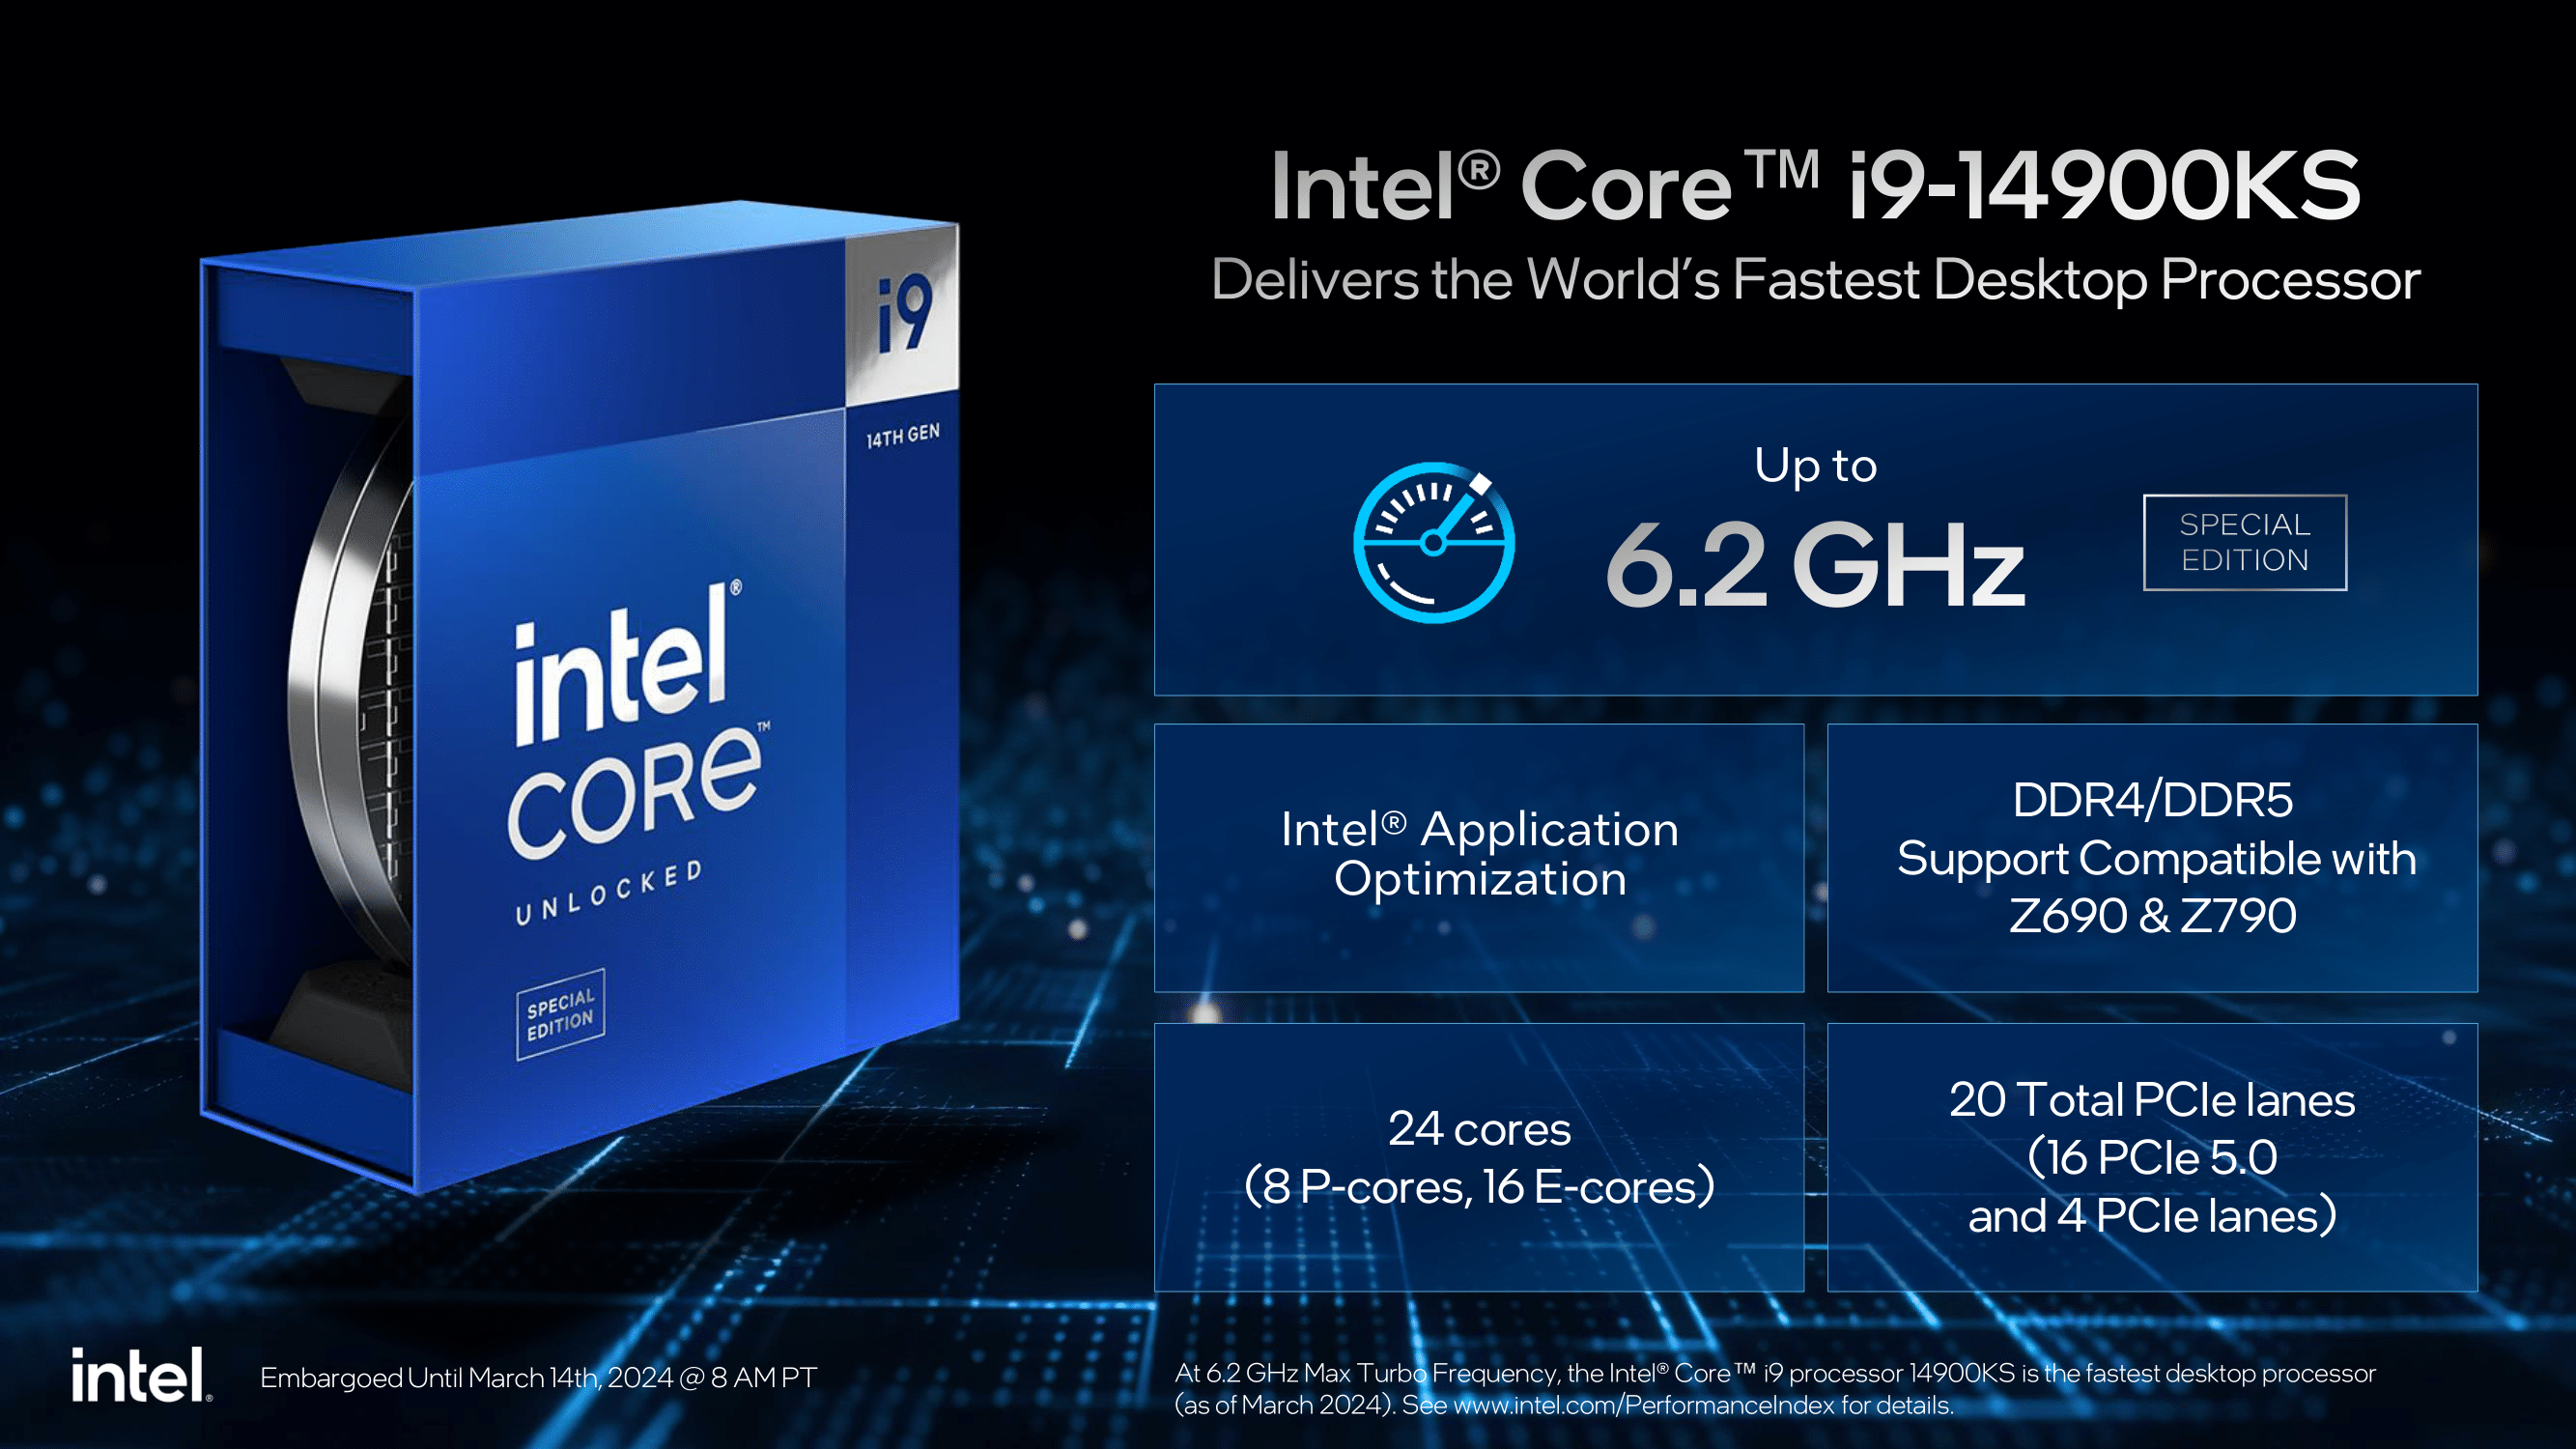 Intel introduces new 9th generation Core i9 processor for desktop gaming